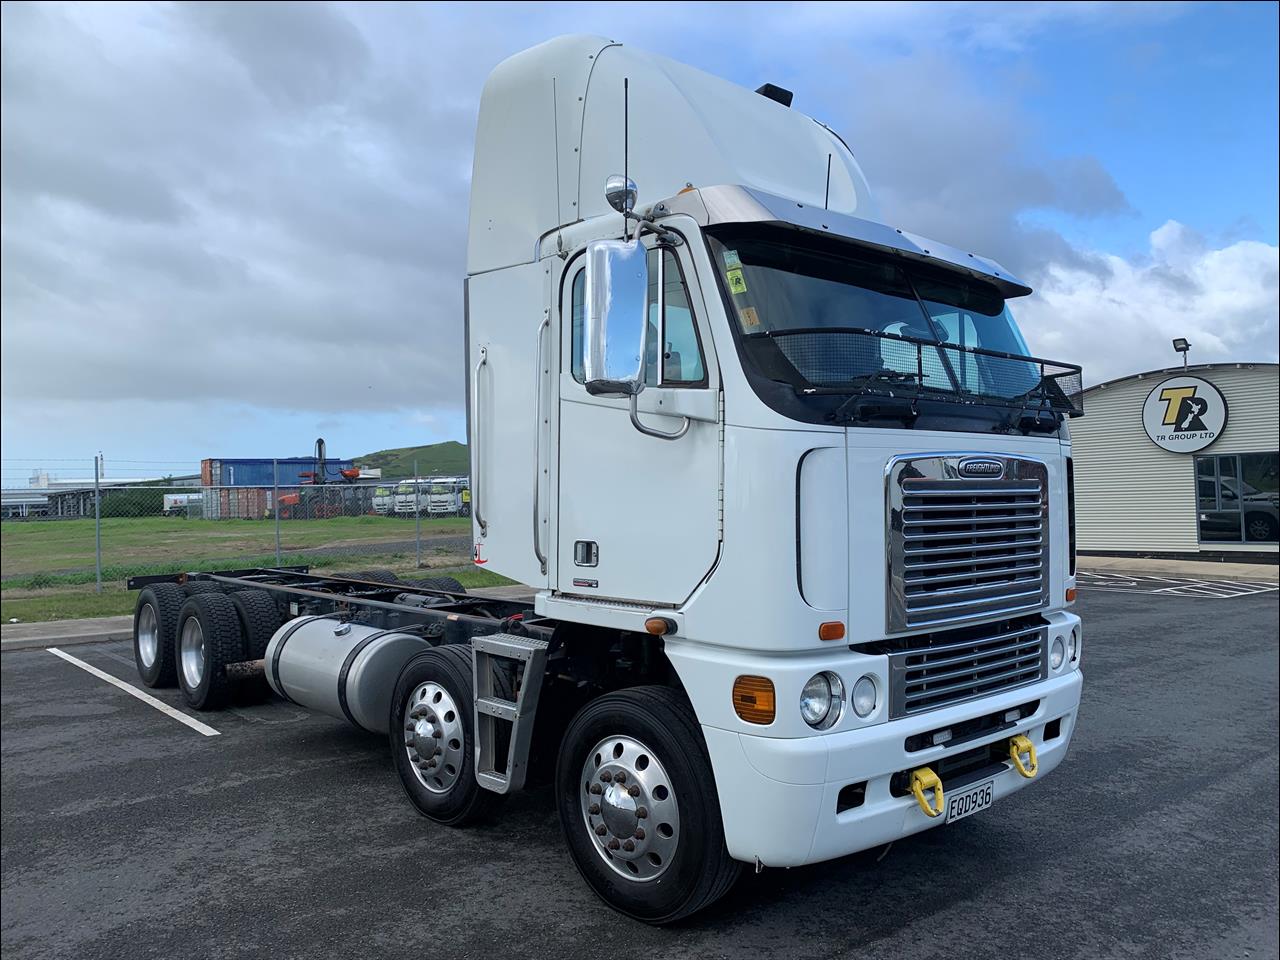 2008 Freightliner ARGOSY - 8x4 Cab Chassis